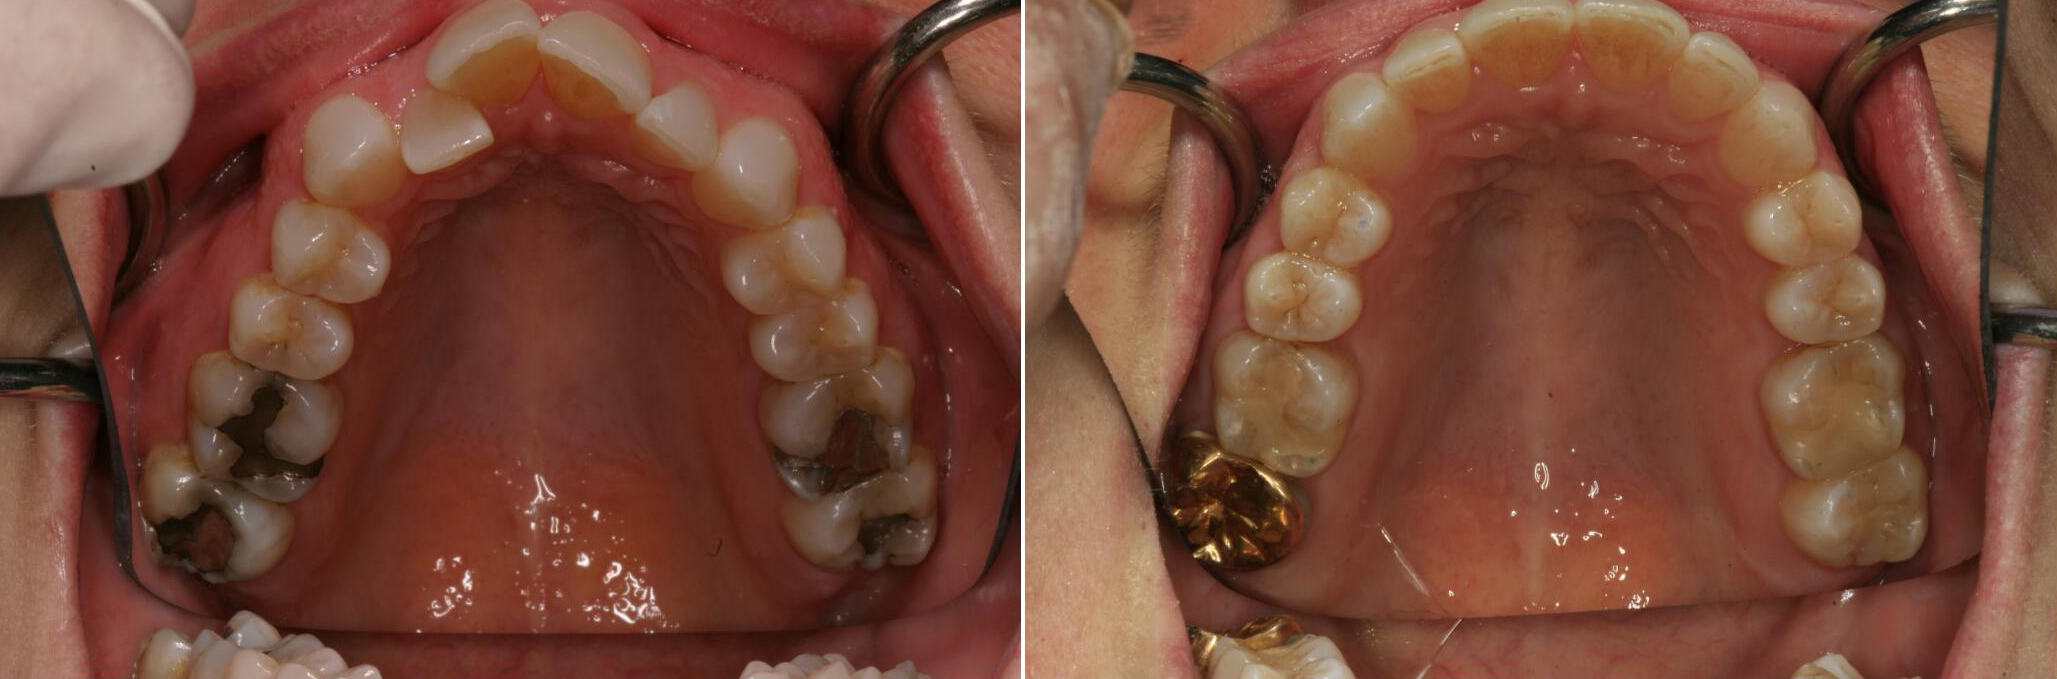 Smile before and after treatment with traditional orthodontics